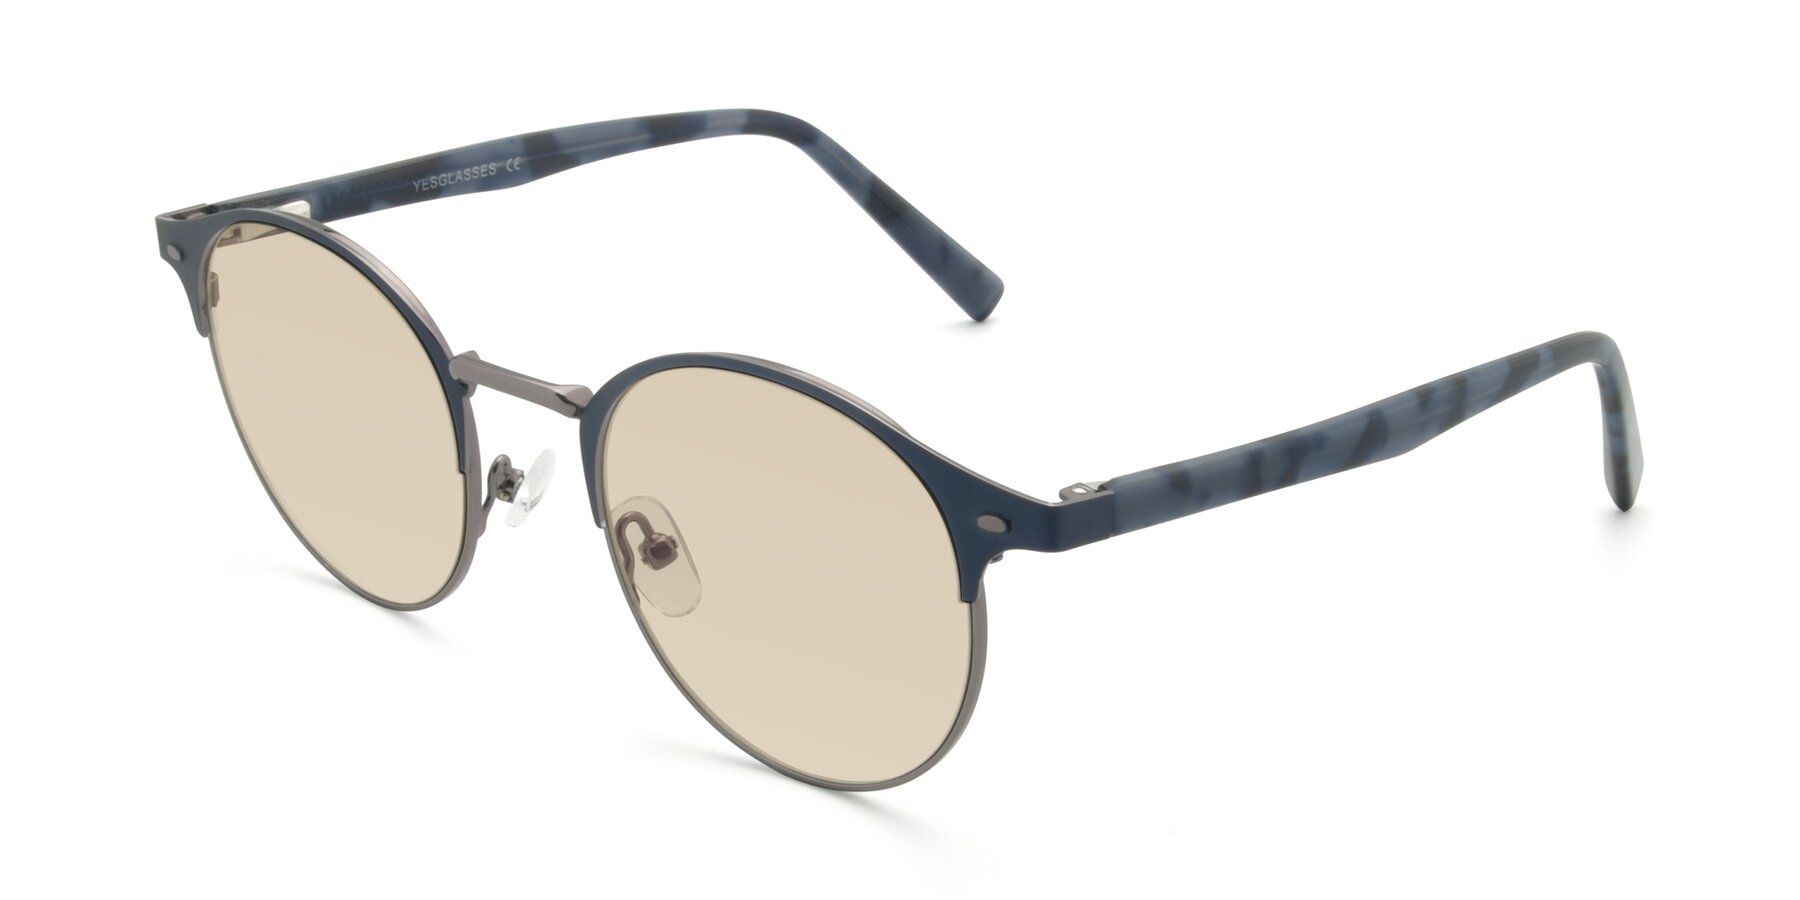 Angle of 9099 in Blue-Gunmetal with Light Brown Tinted Lenses